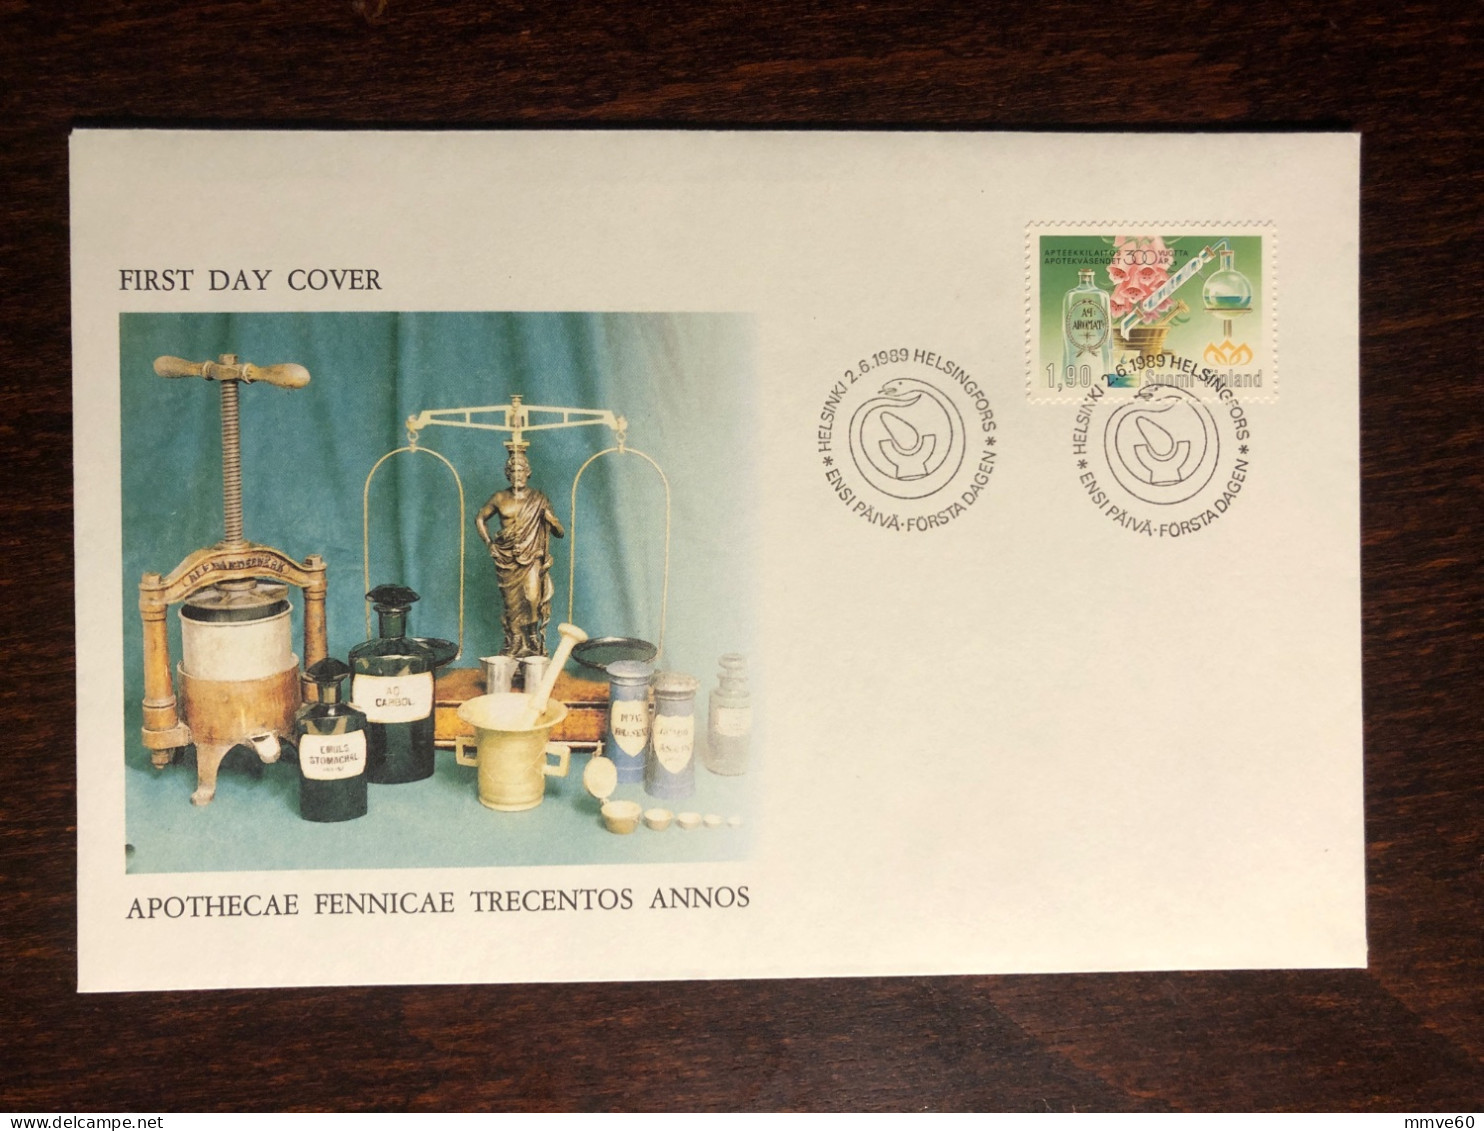 FINLAND FDC COVER 1989 YEAR PHARMACY PHARMACOLOGY HEALTH MEDICINE STAMPS - Brieven En Documenten